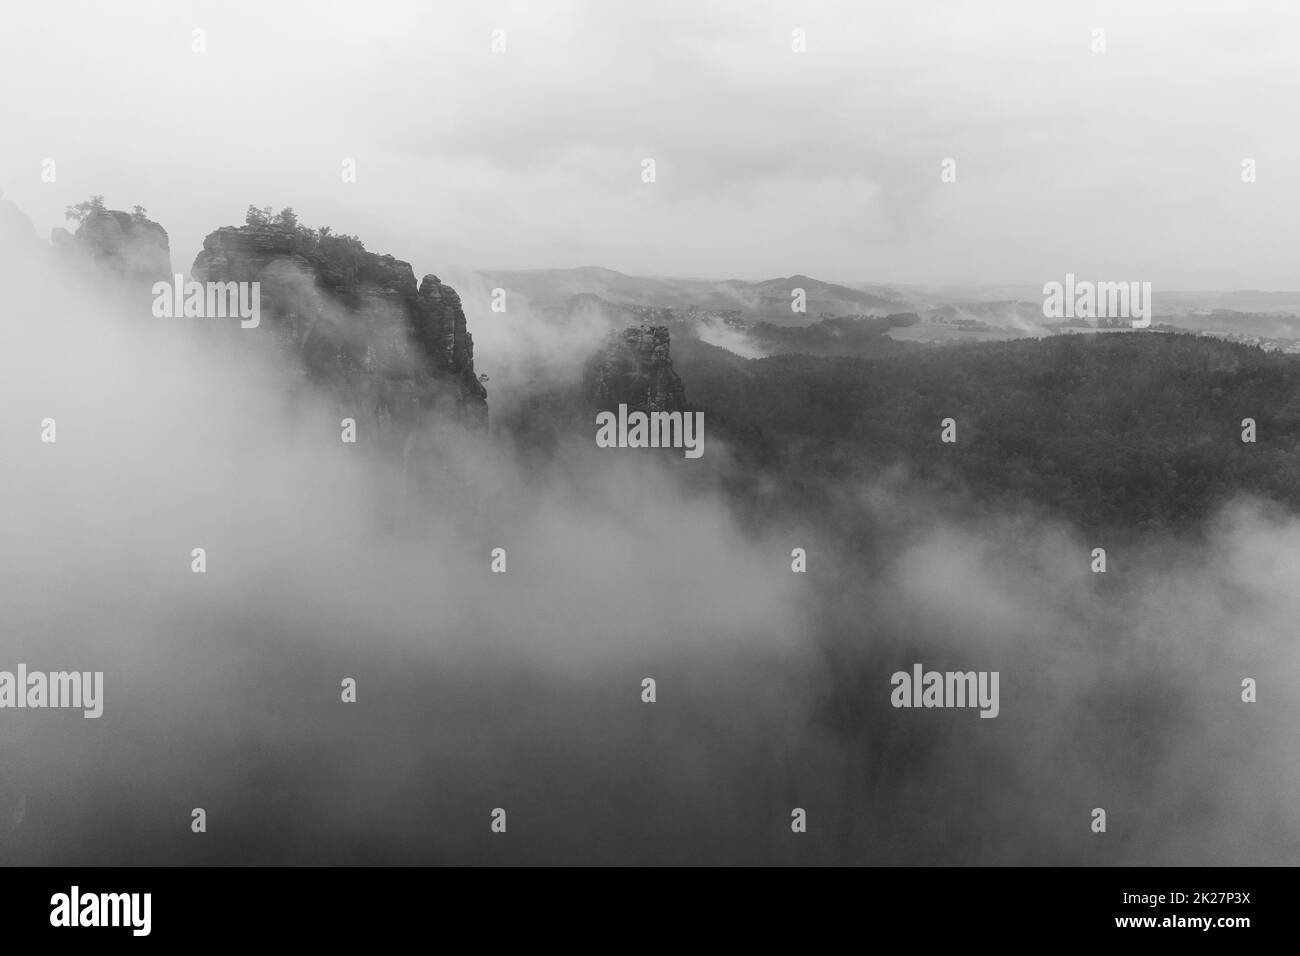 An early cloudy morning in mountain. Schrammsteine - group of rocks are a long, strung-out, very jagged in the Elbe Sandstone Mountains located in Saxon Switzerland in East Germany. Black and white. Stock Photo